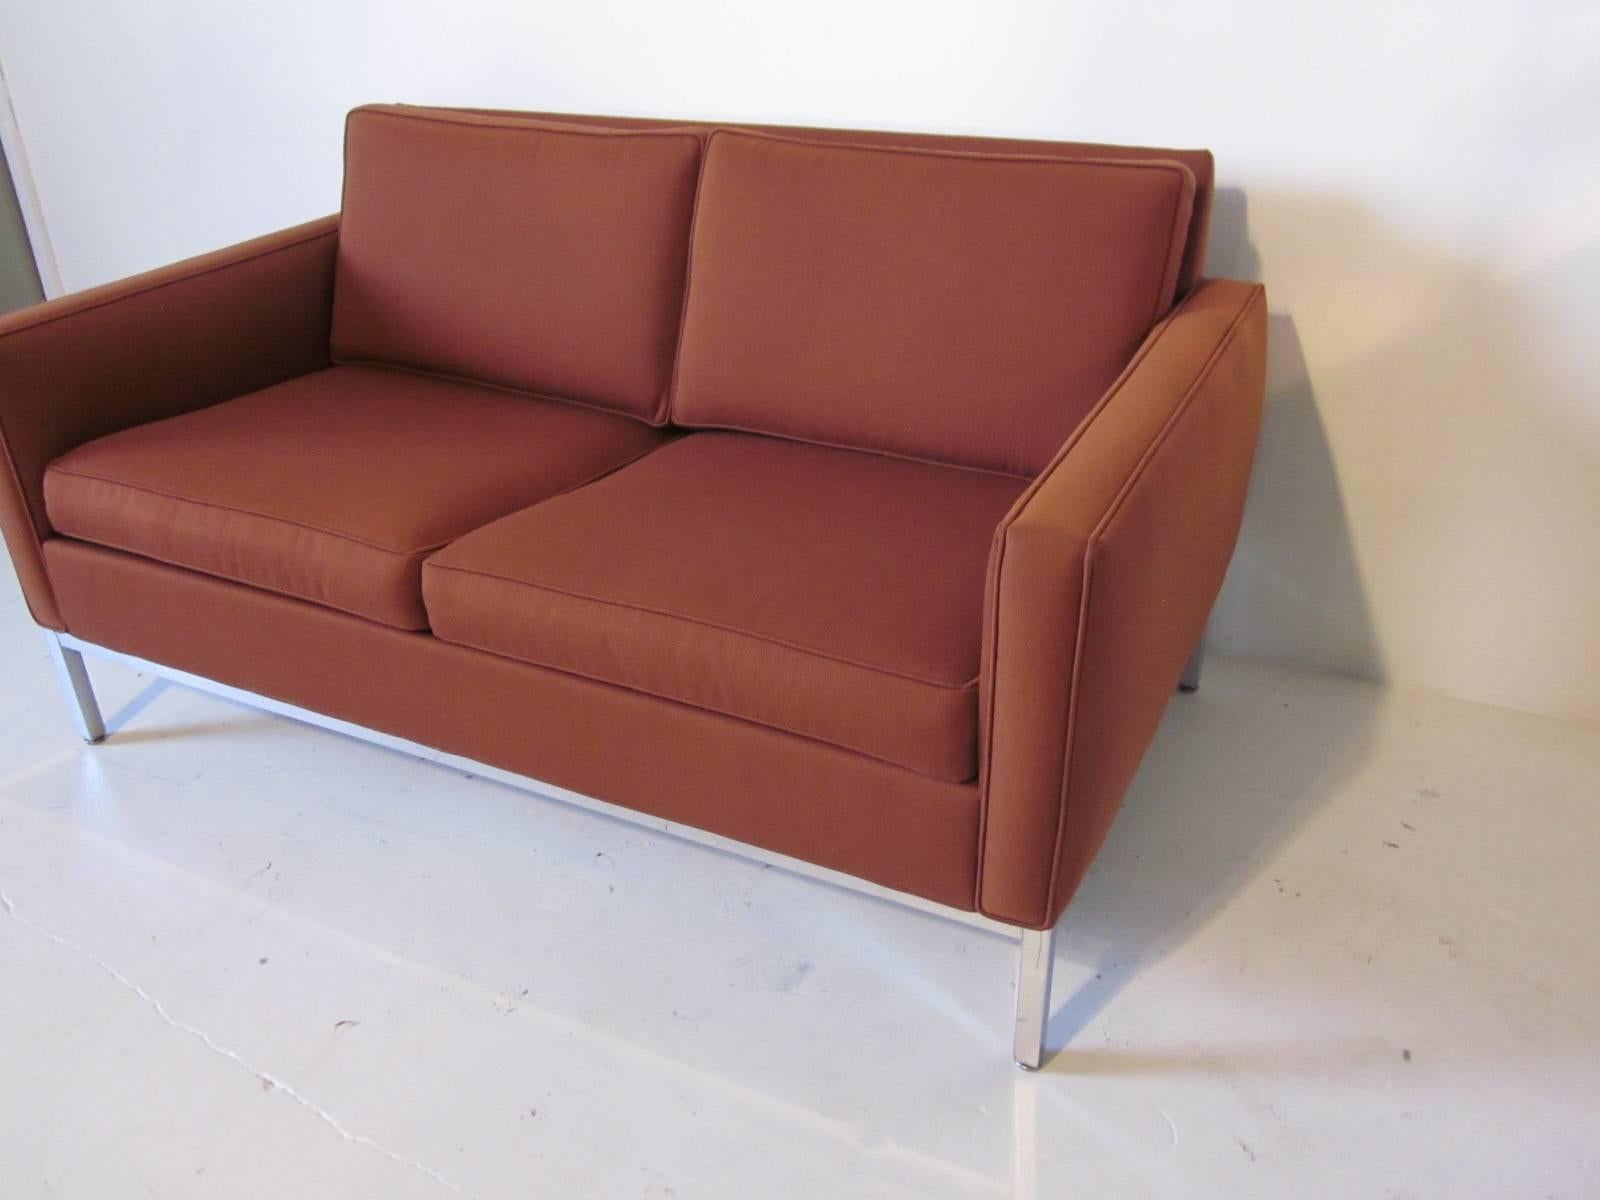 A smaller loveseat sofa with an aluminum square tubed framed base and two cushion seat in the manner of Florence Knoll.